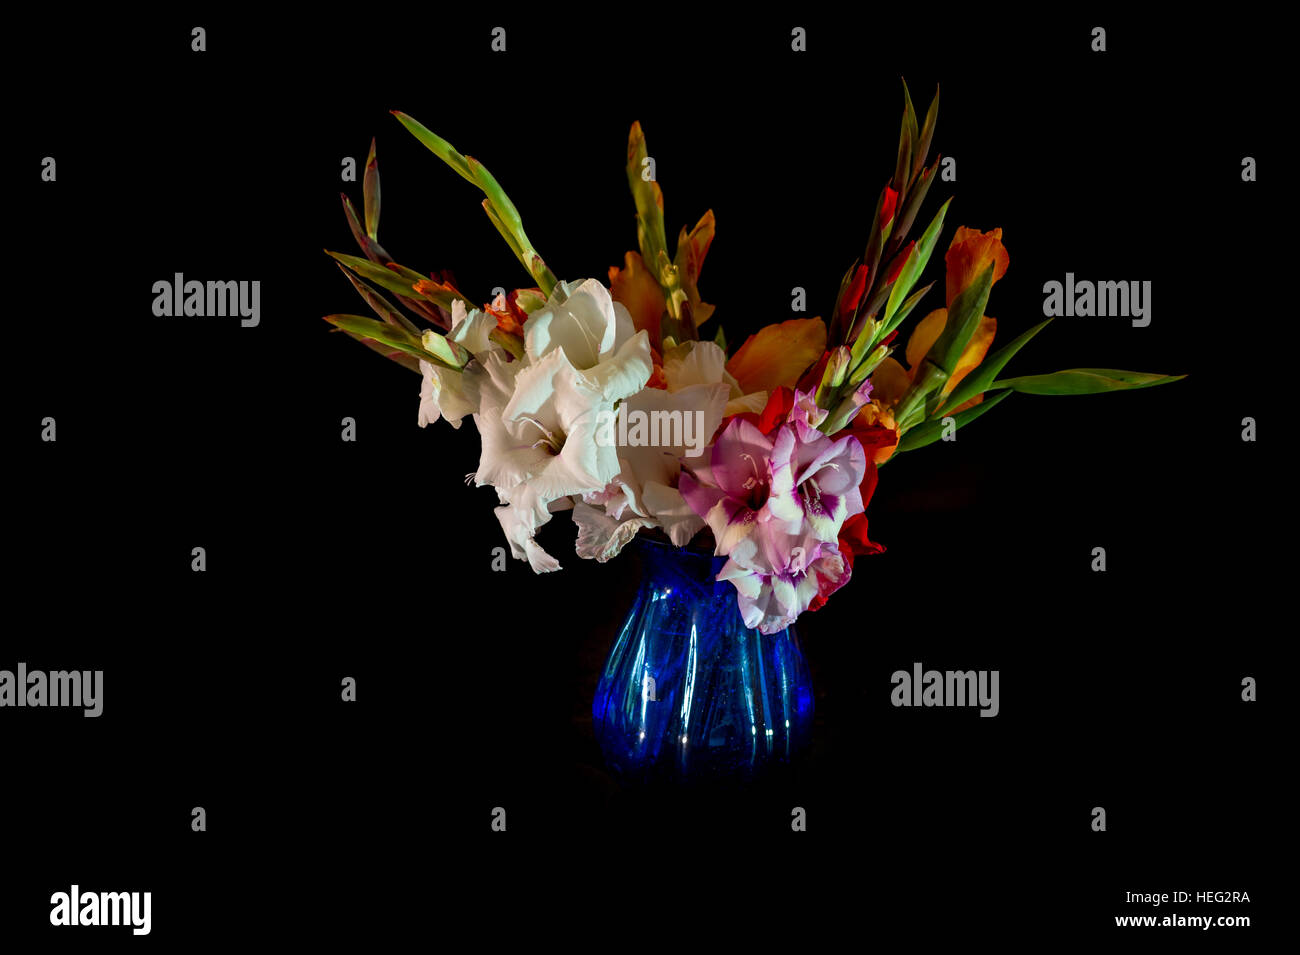 Bouquet of Gladiolus in a blue vase of glass, a still life on black background. Stock Photo